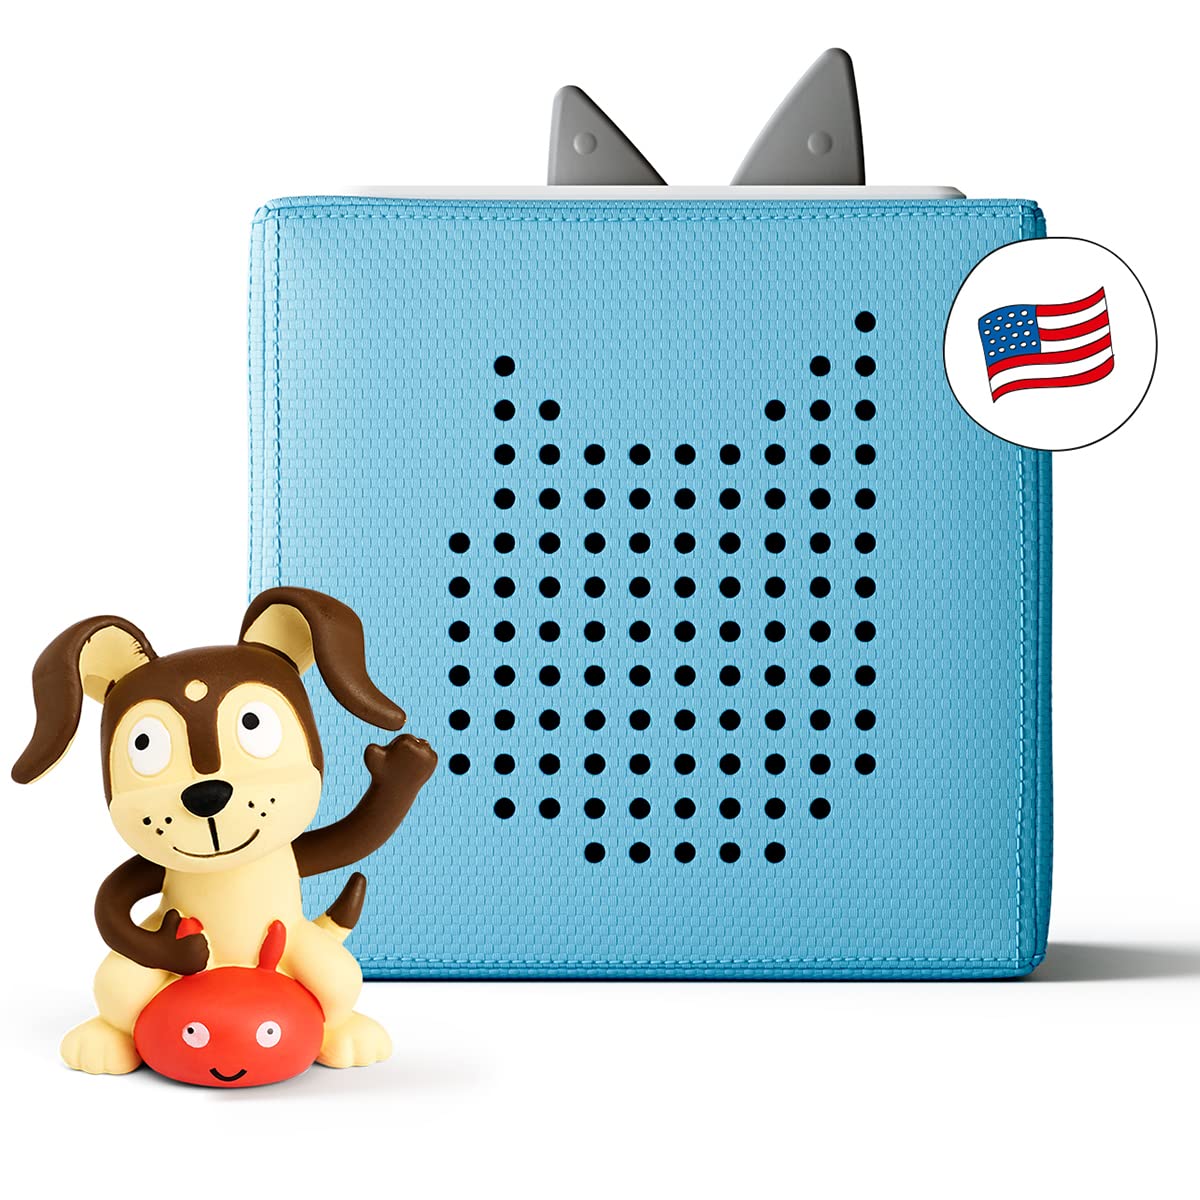 Toniebox Audio Player Starter Set with Playtime Puppy - Listen, Learn, and Play with One Huggable Little Box - Light Blue - $69.99